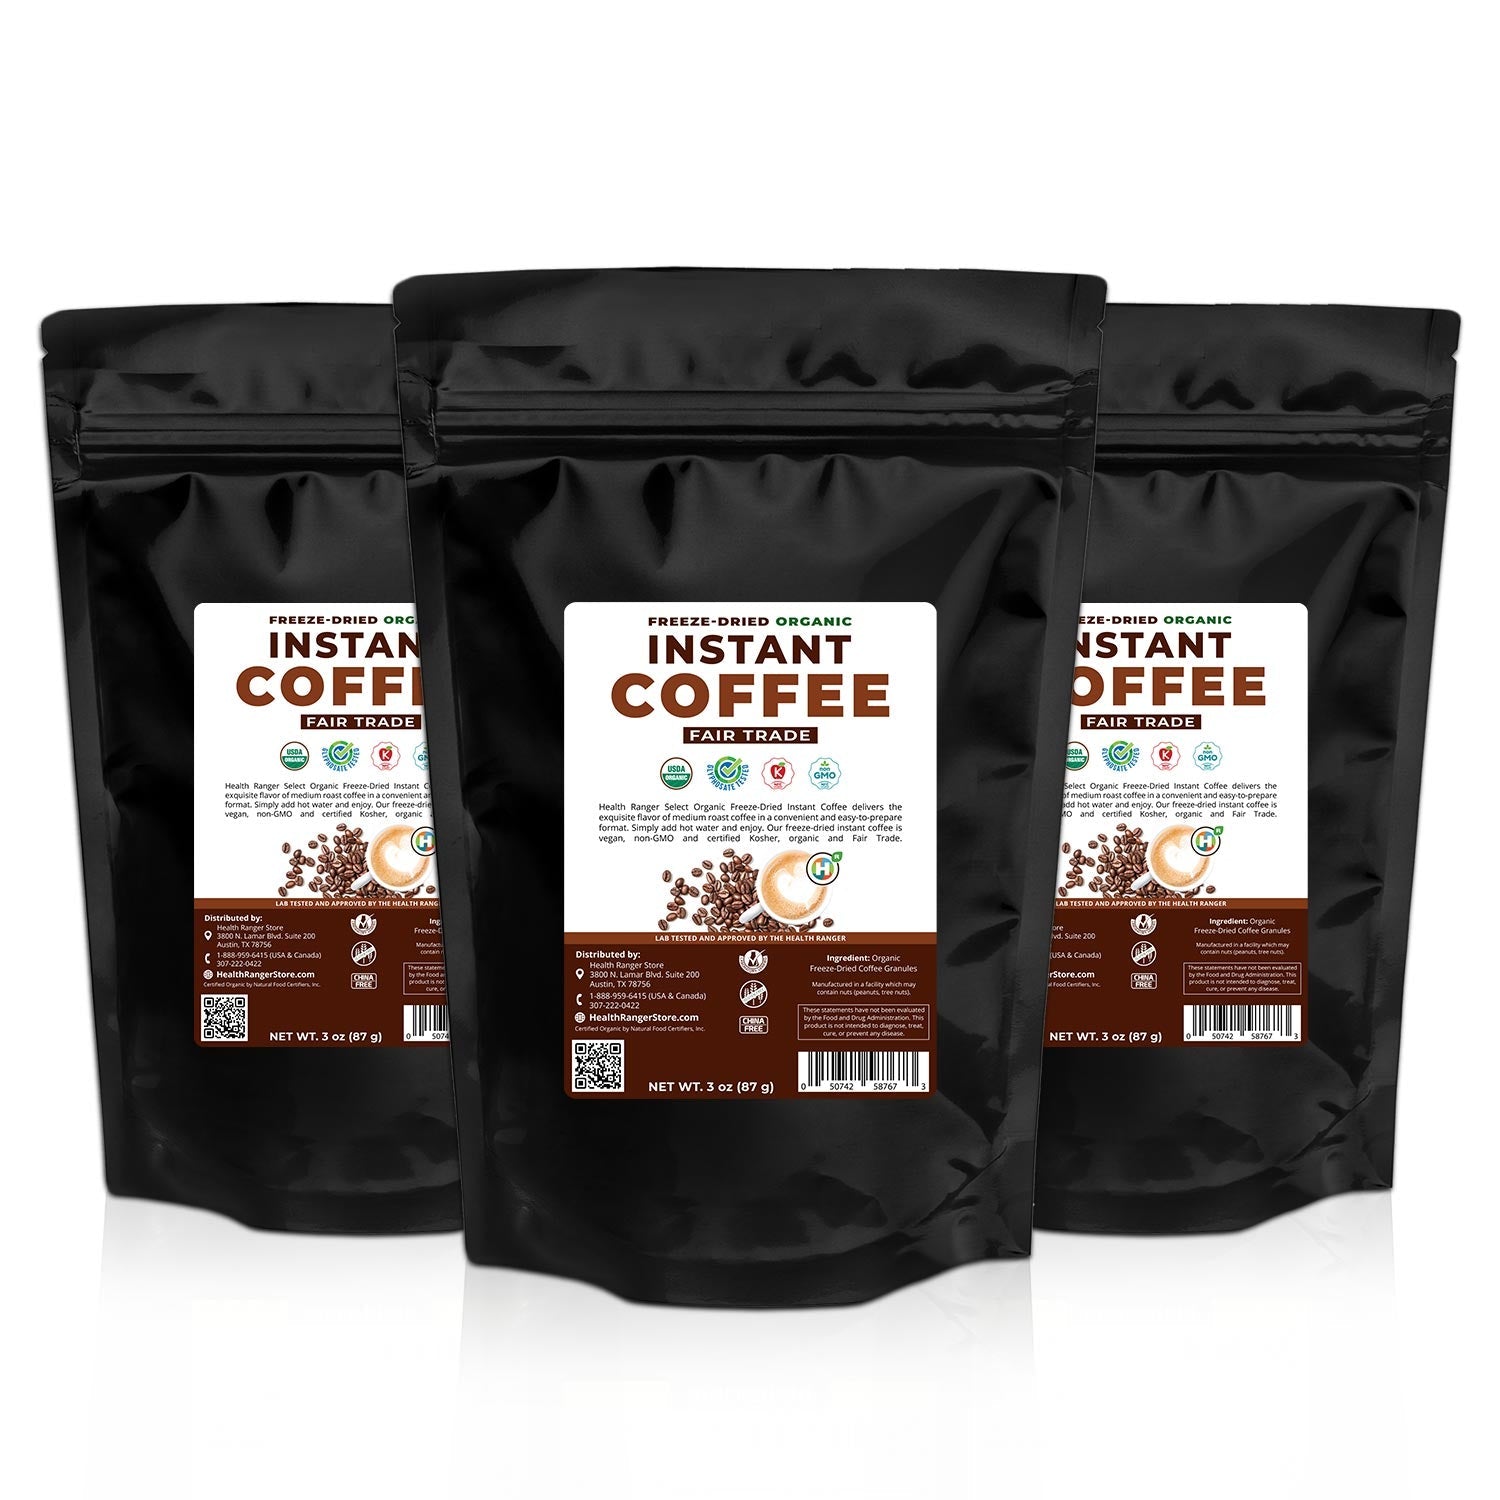 Fair Trade Organic Freeze-Dried Instant Coffee 3oz (87g) (3-Pack)